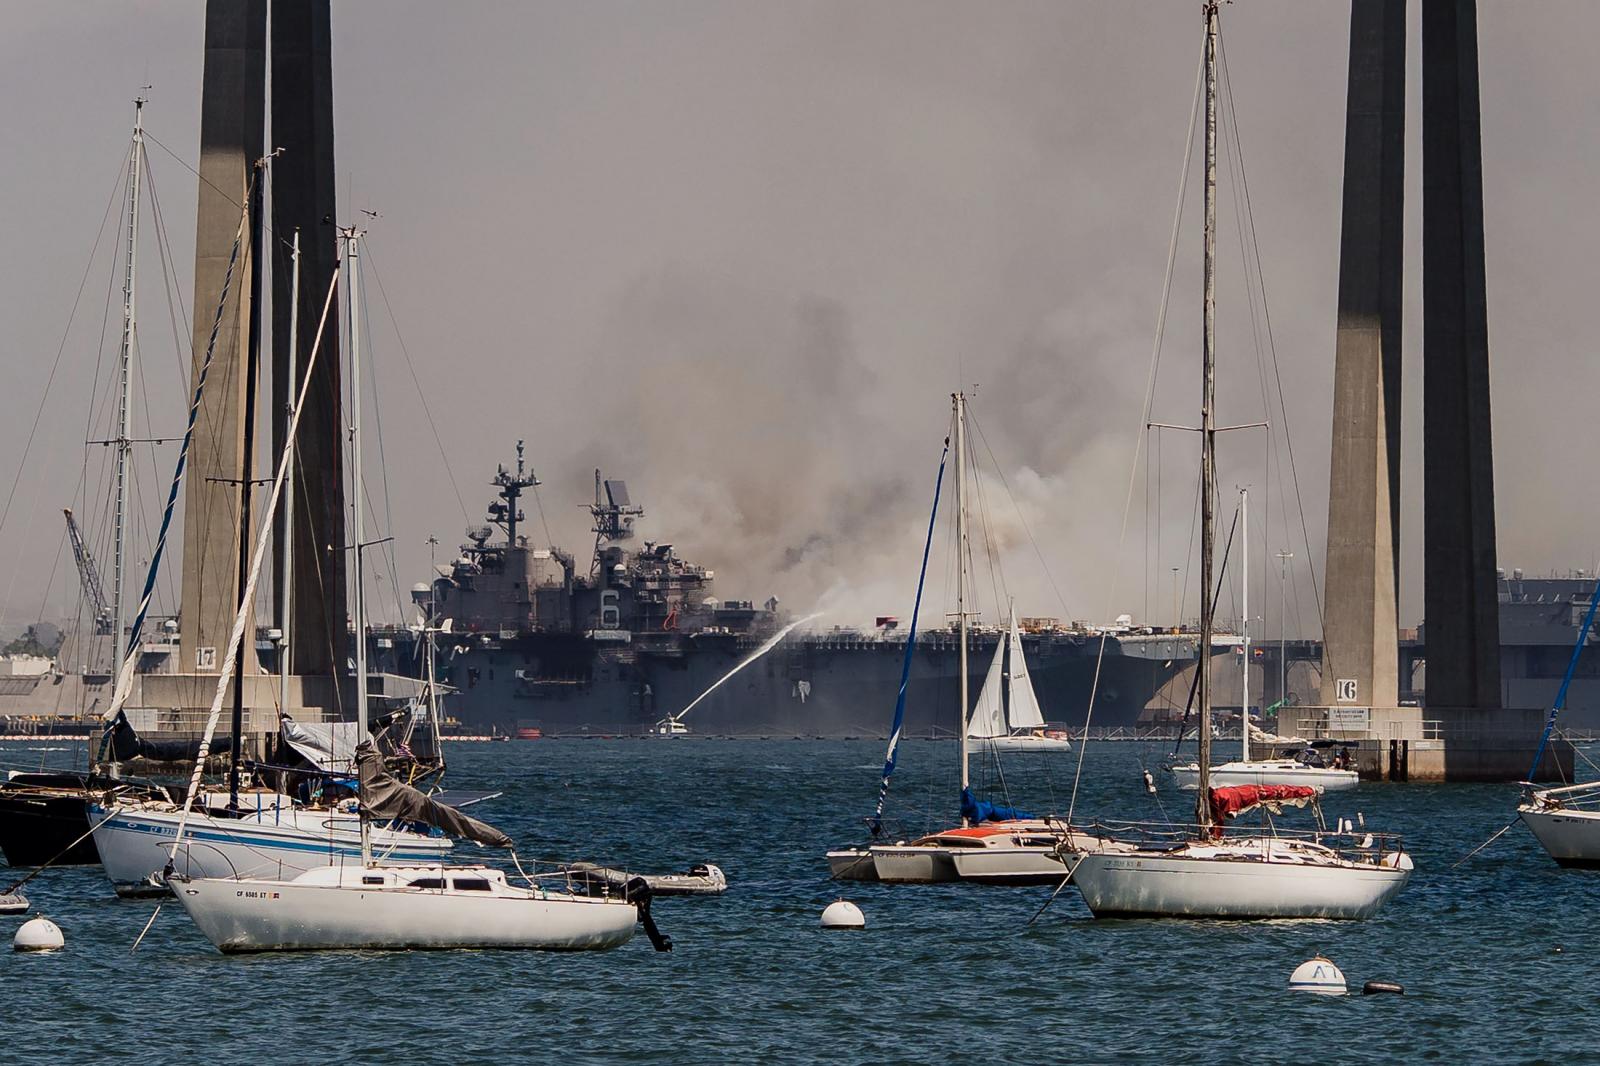 View of emergency crews responding to the scene of a fire aboard the USS Bonhomme Richard in San Diego, California on July 12, 2020.